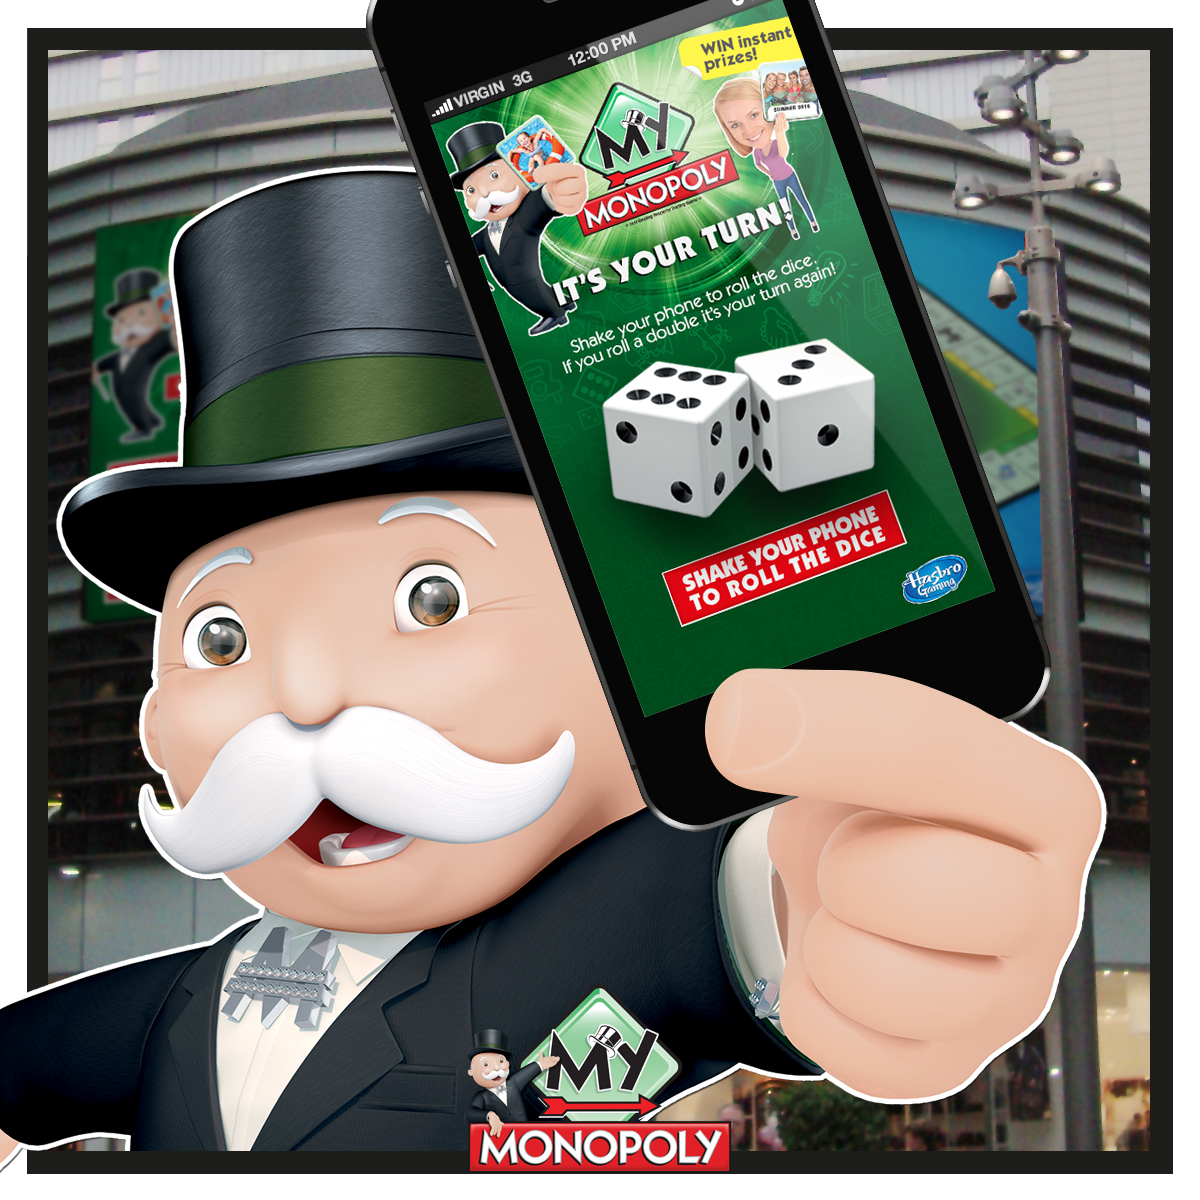 Hasbro Promotes 'My Monopoly' with Mobile Technology at Westfield Stratford